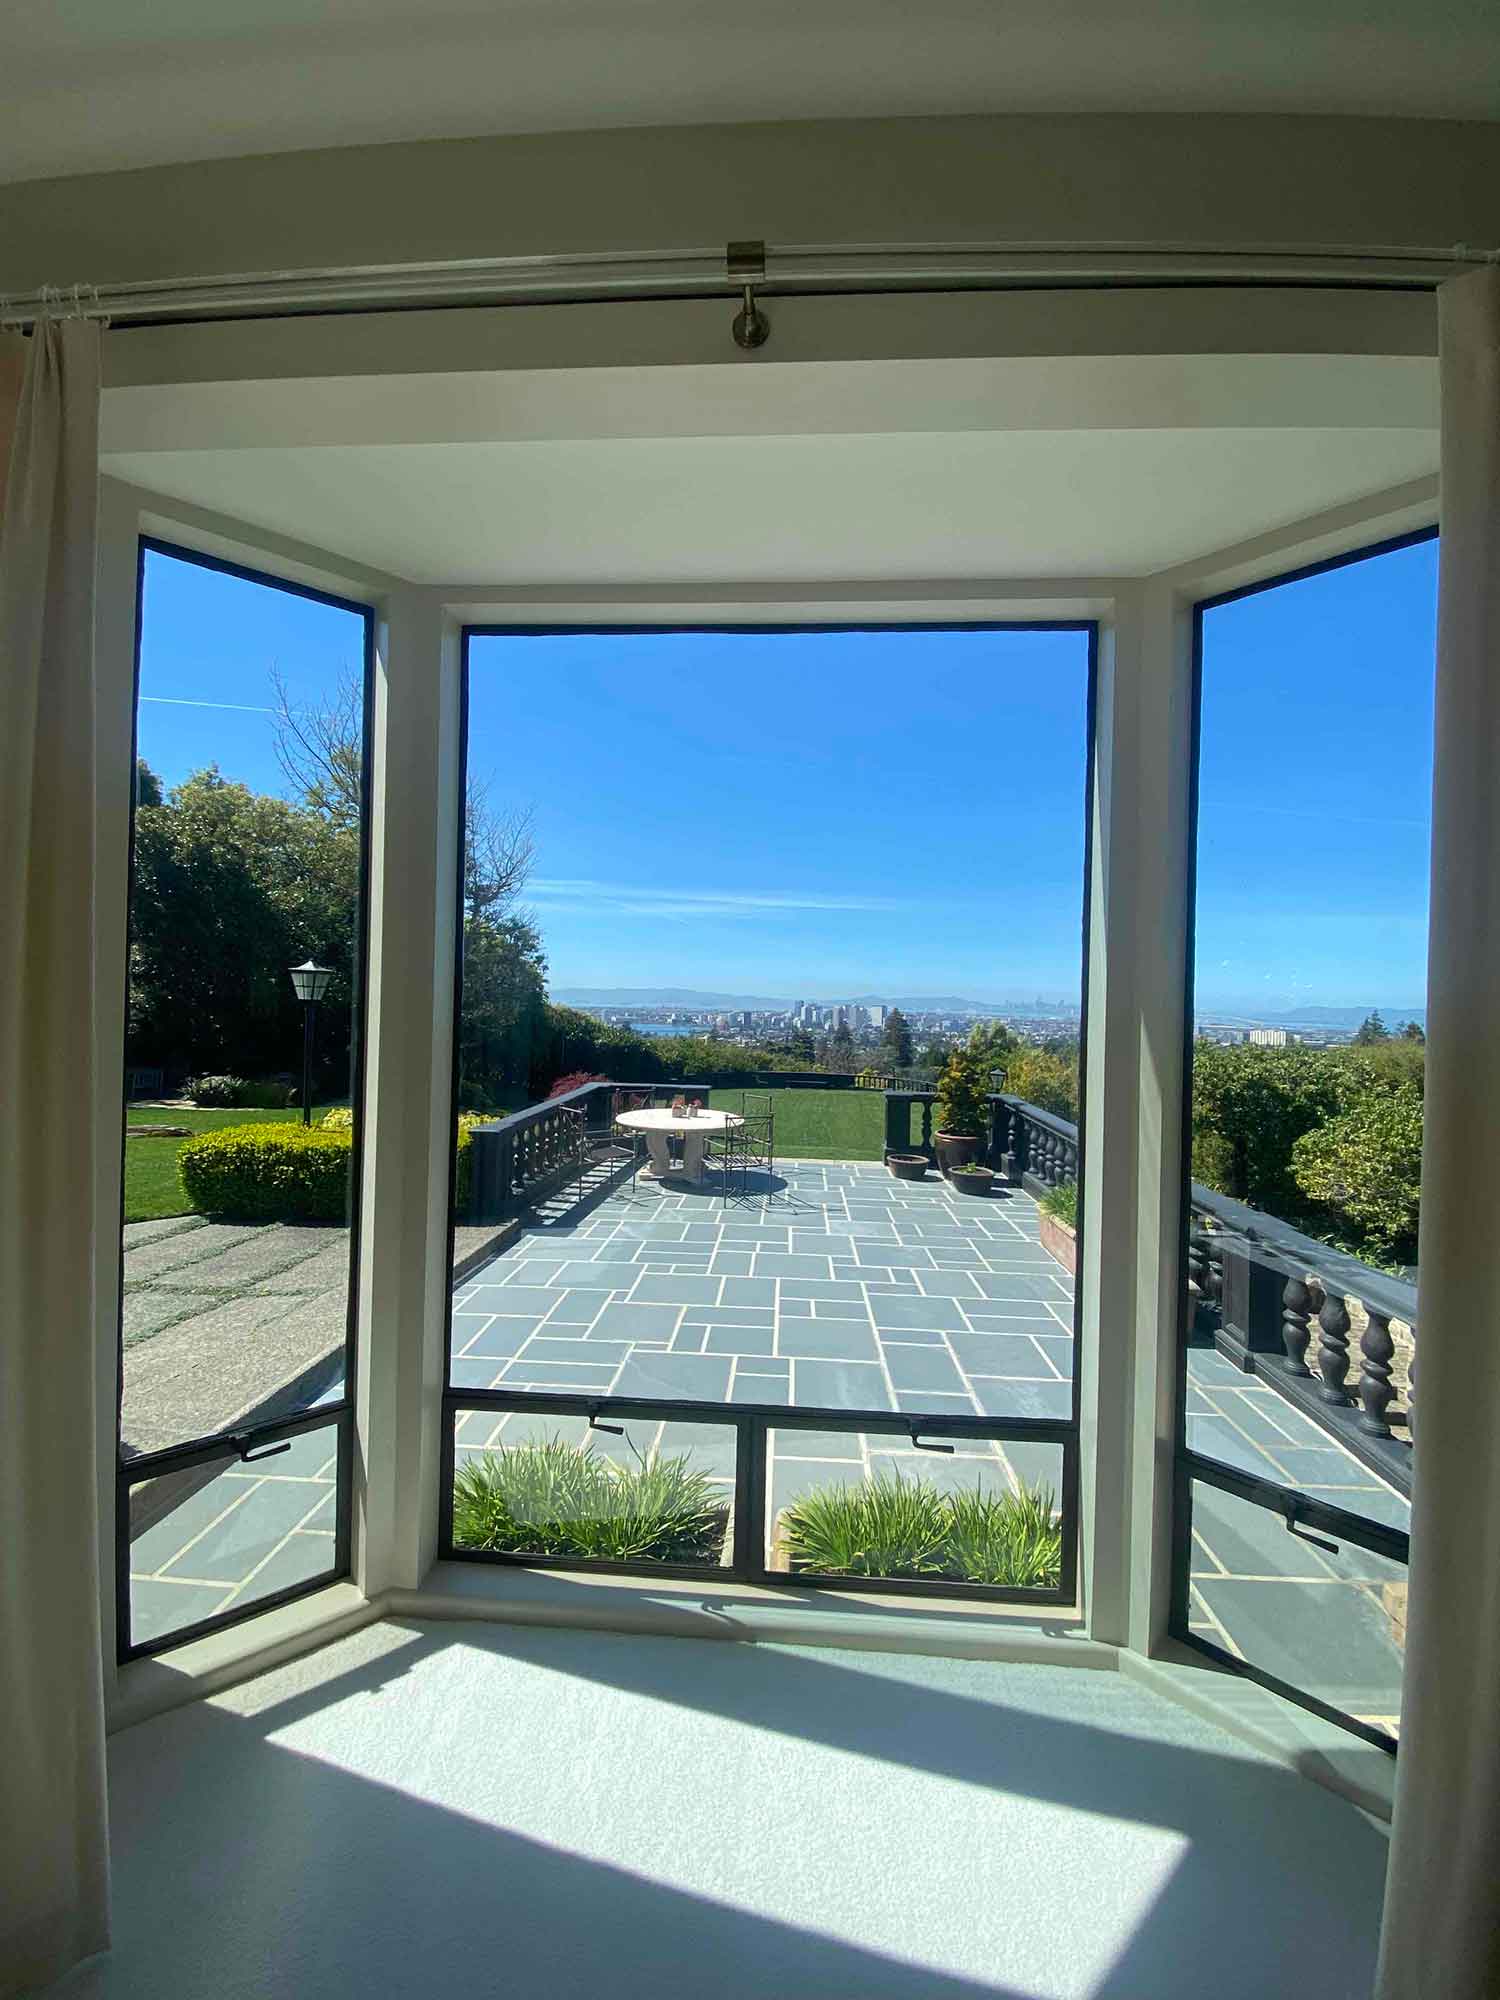 A beautiful view made better with 3M Window Film in Piedmont, CA. Installed by ClimatePro.